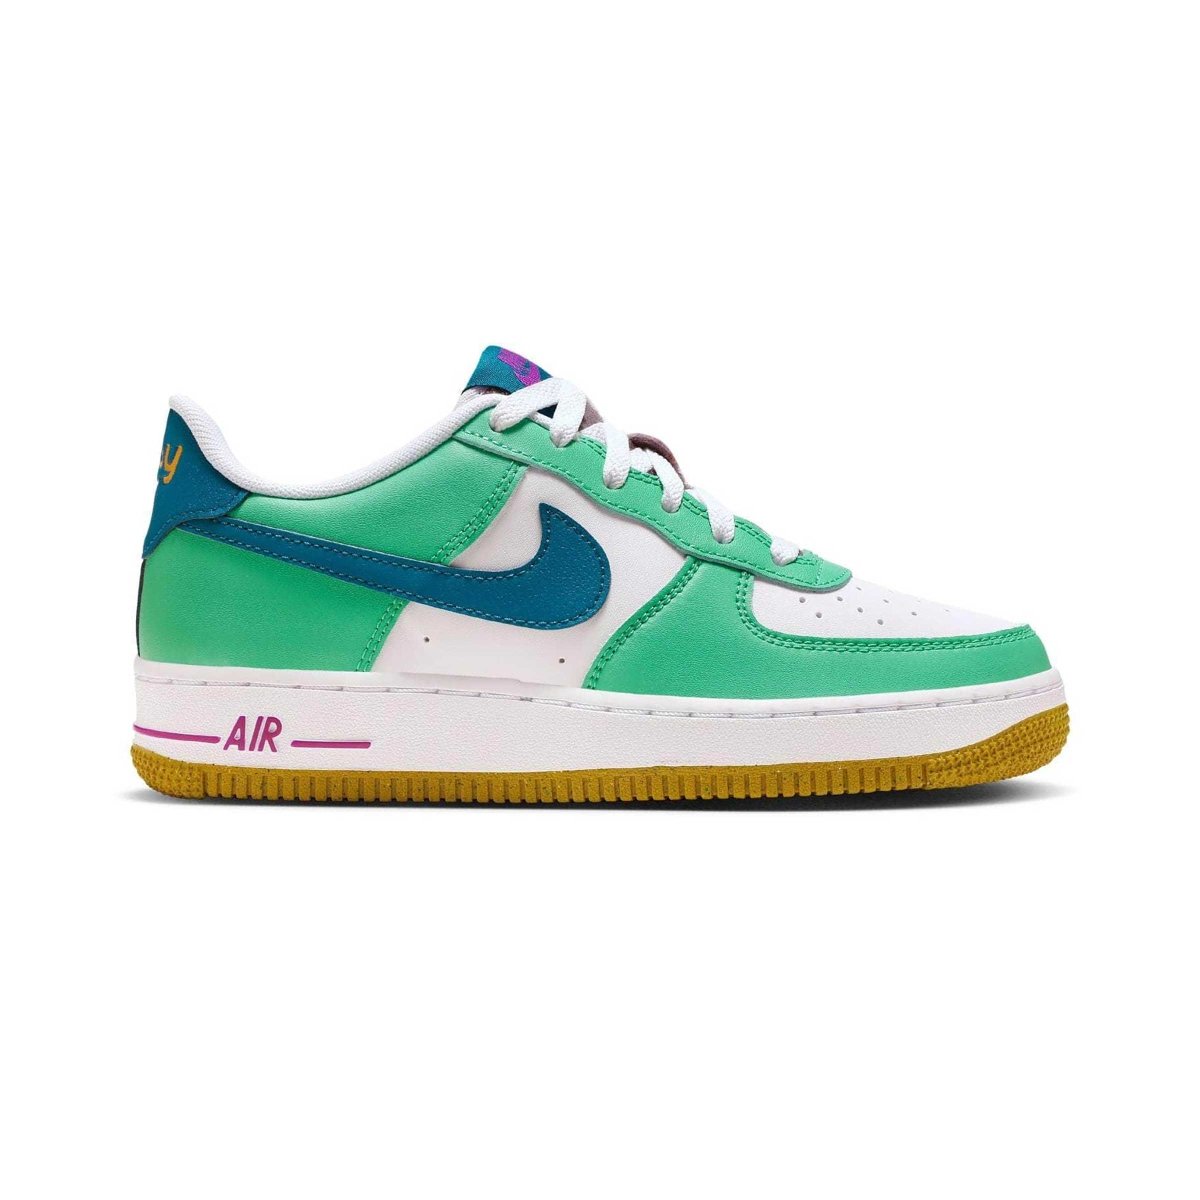 Nike GS (Grade School) Air Force 1 LV8 Play - 10030426 - West NYC